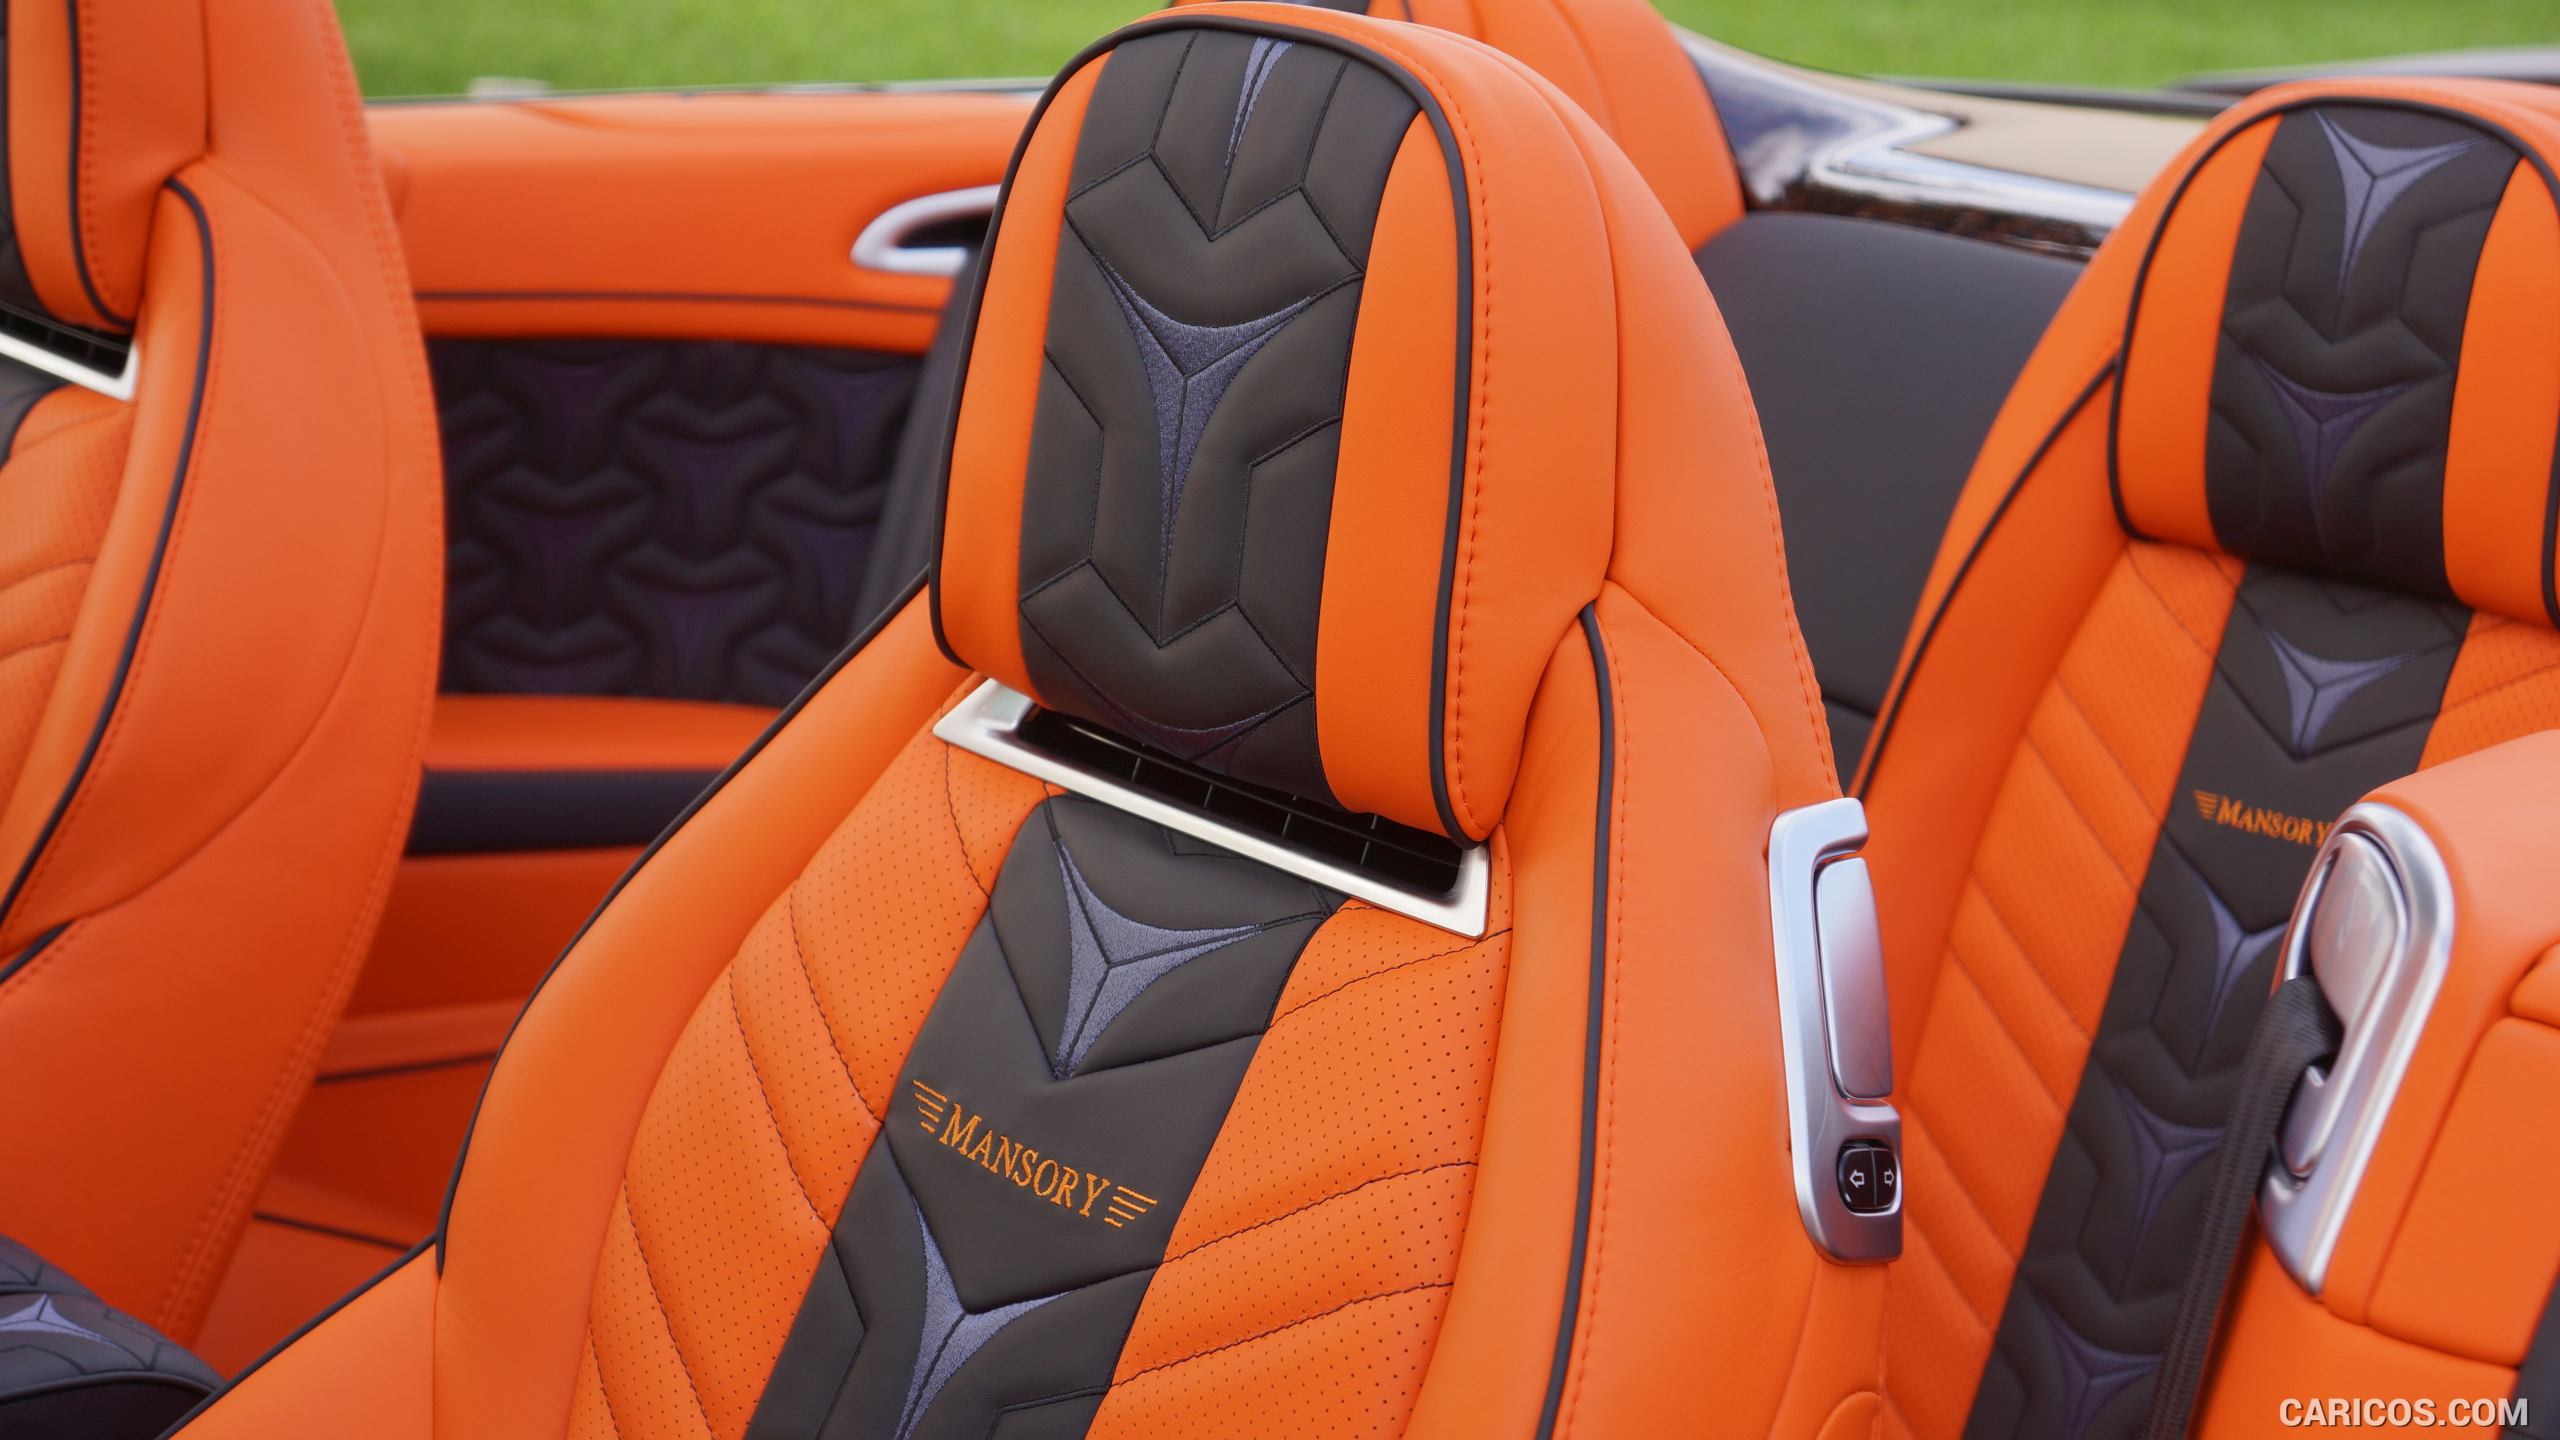 2016 MANSORY Bentley Continental GT Convertible - Interior, #13 of 13